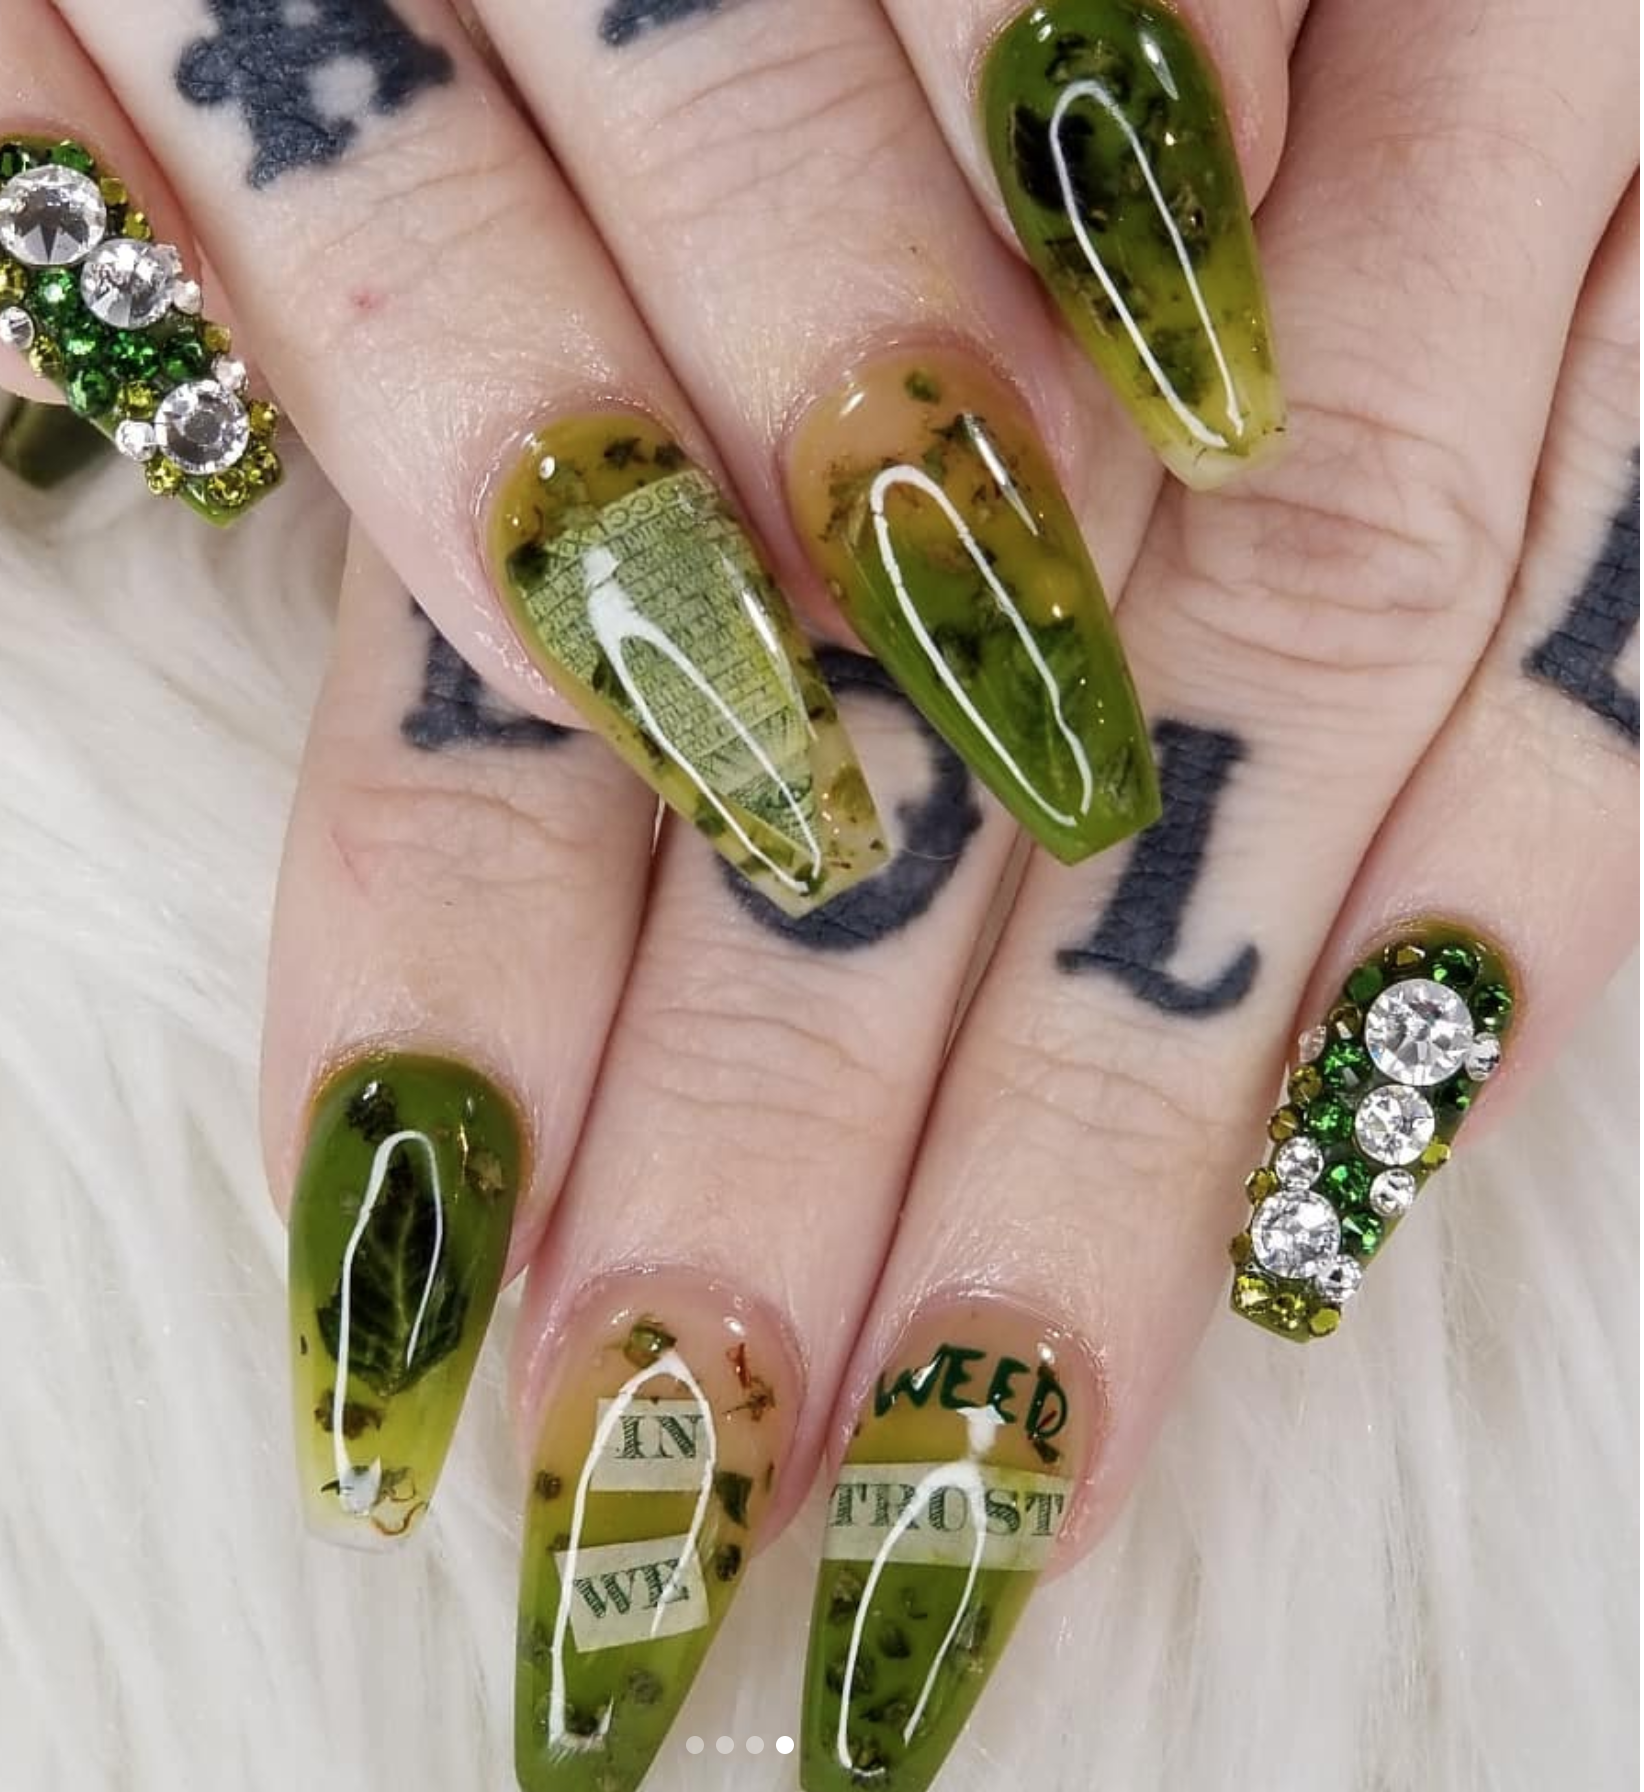 Here's the nail art I did for 4/20 this year 🍃💅 Was too busy celebrating  that day to remember to post. Hope you all had an exquisite week! :  r/entwives